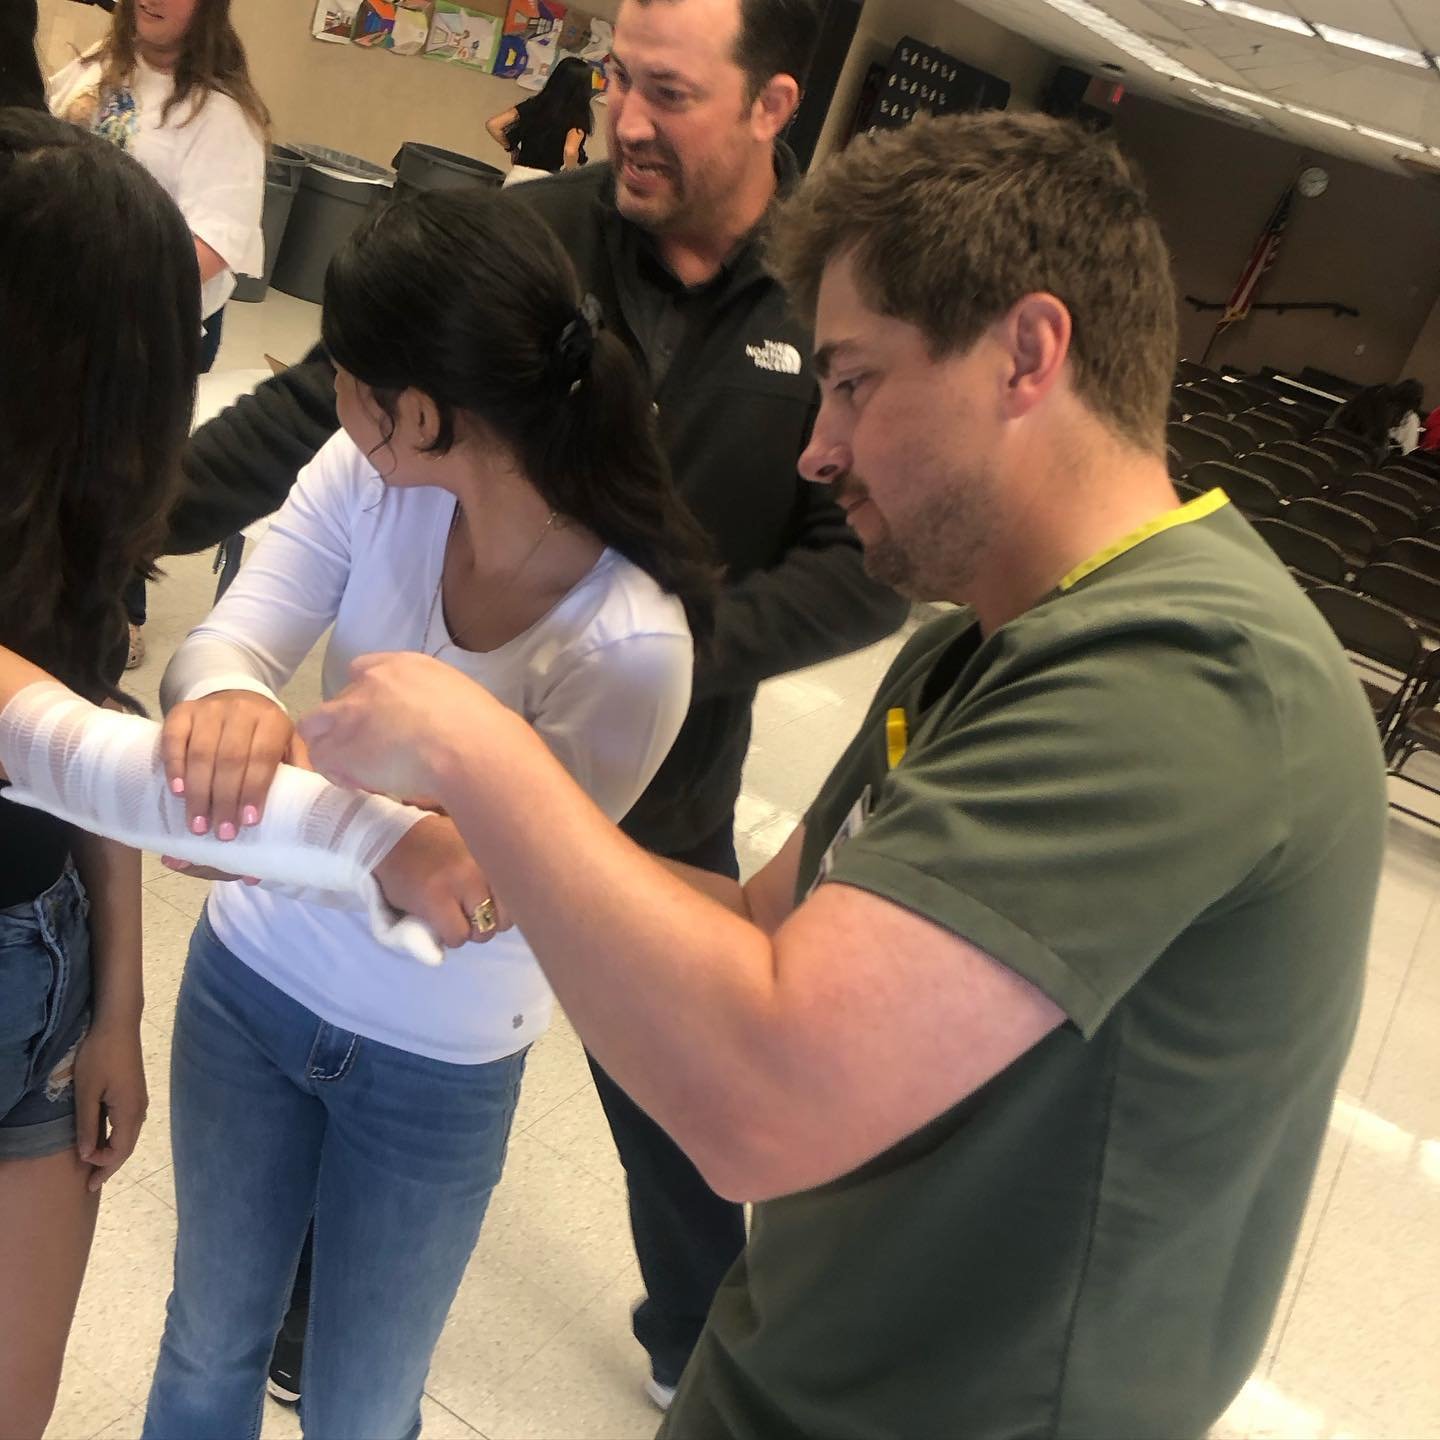 Drs. Roth and Loe teaching the musculoskeletal system and splinting to our local junior high students #communityoutreach #inspiringyoungminds #anatomy #emresidency